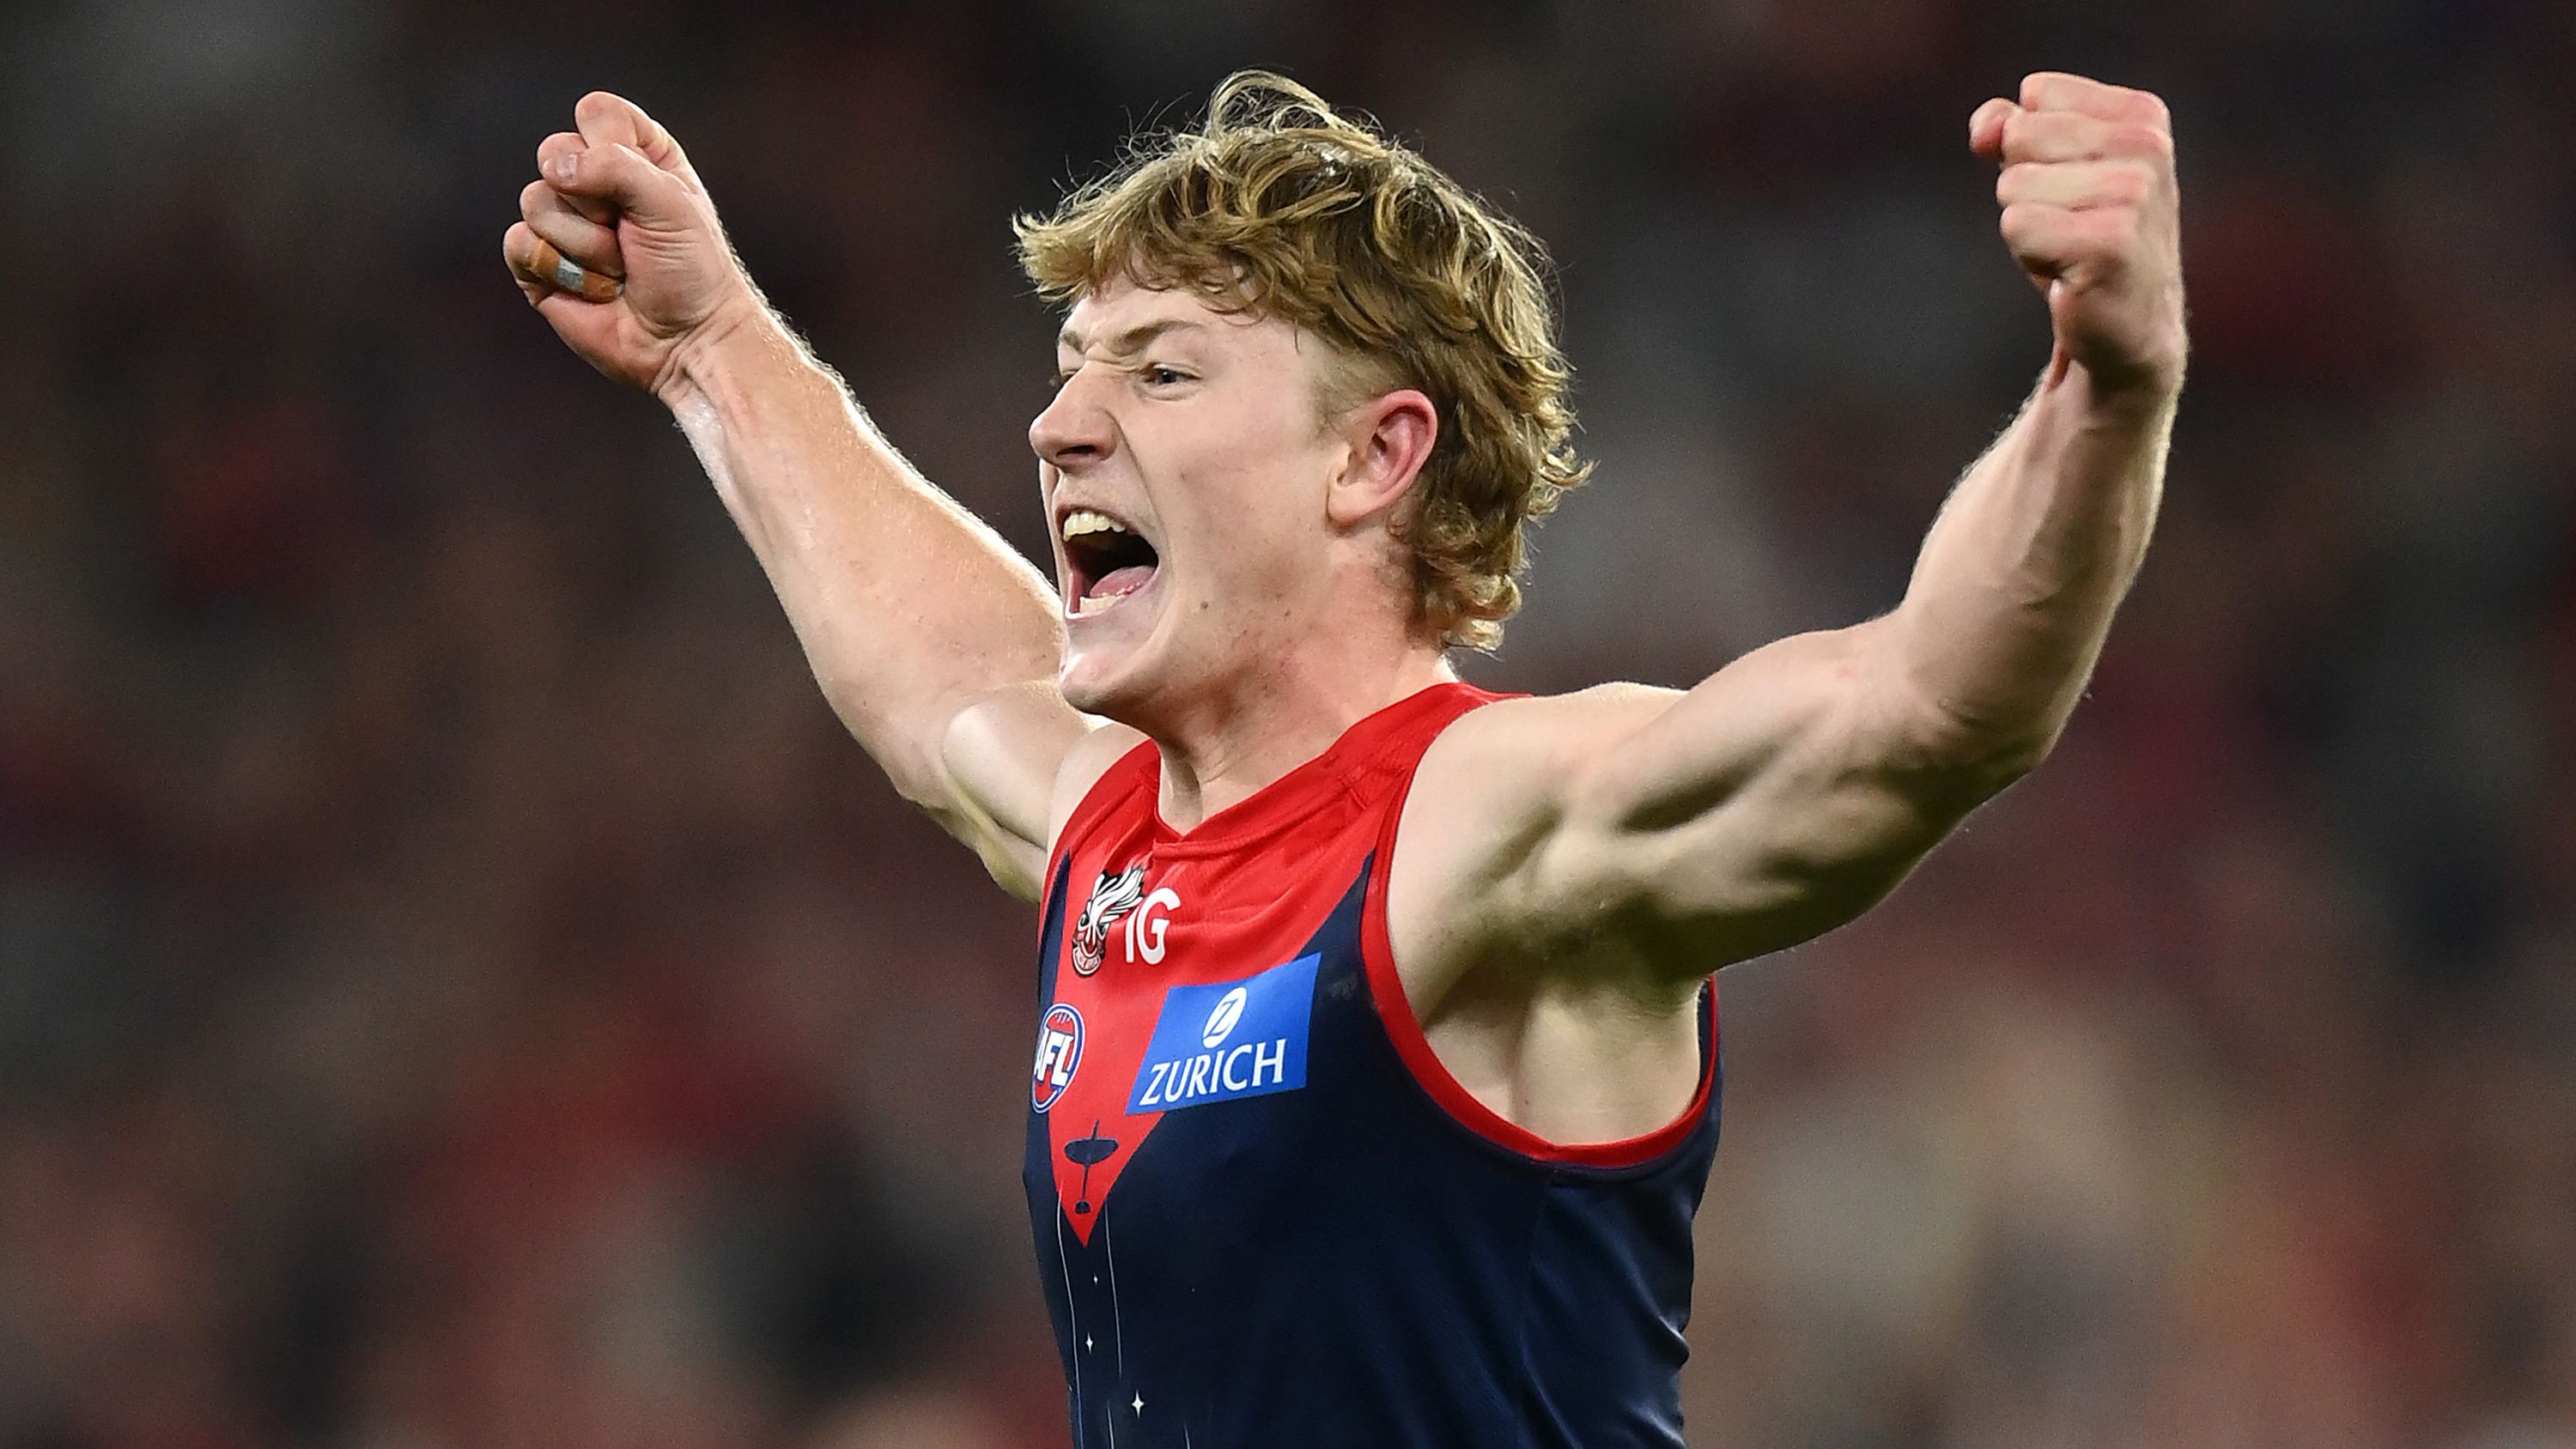 Melbourne youngster Jacob van Rooyen stars in 'special' final quarter against Richmond